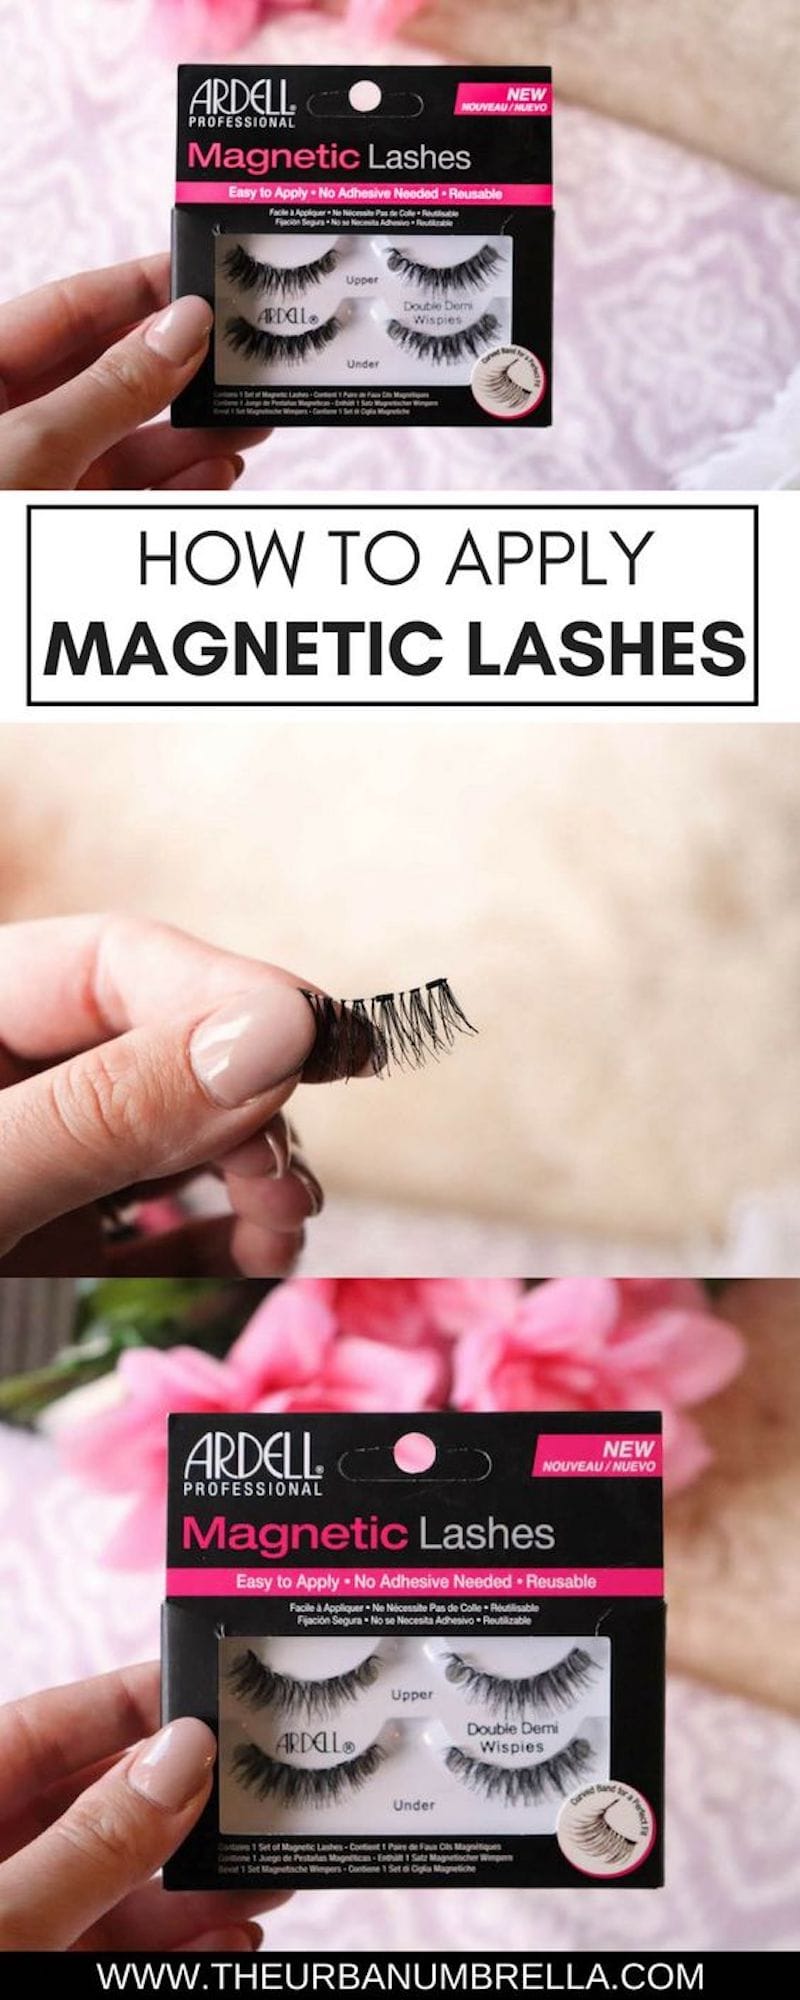 How to Apply Ardell Magnetic Lashes